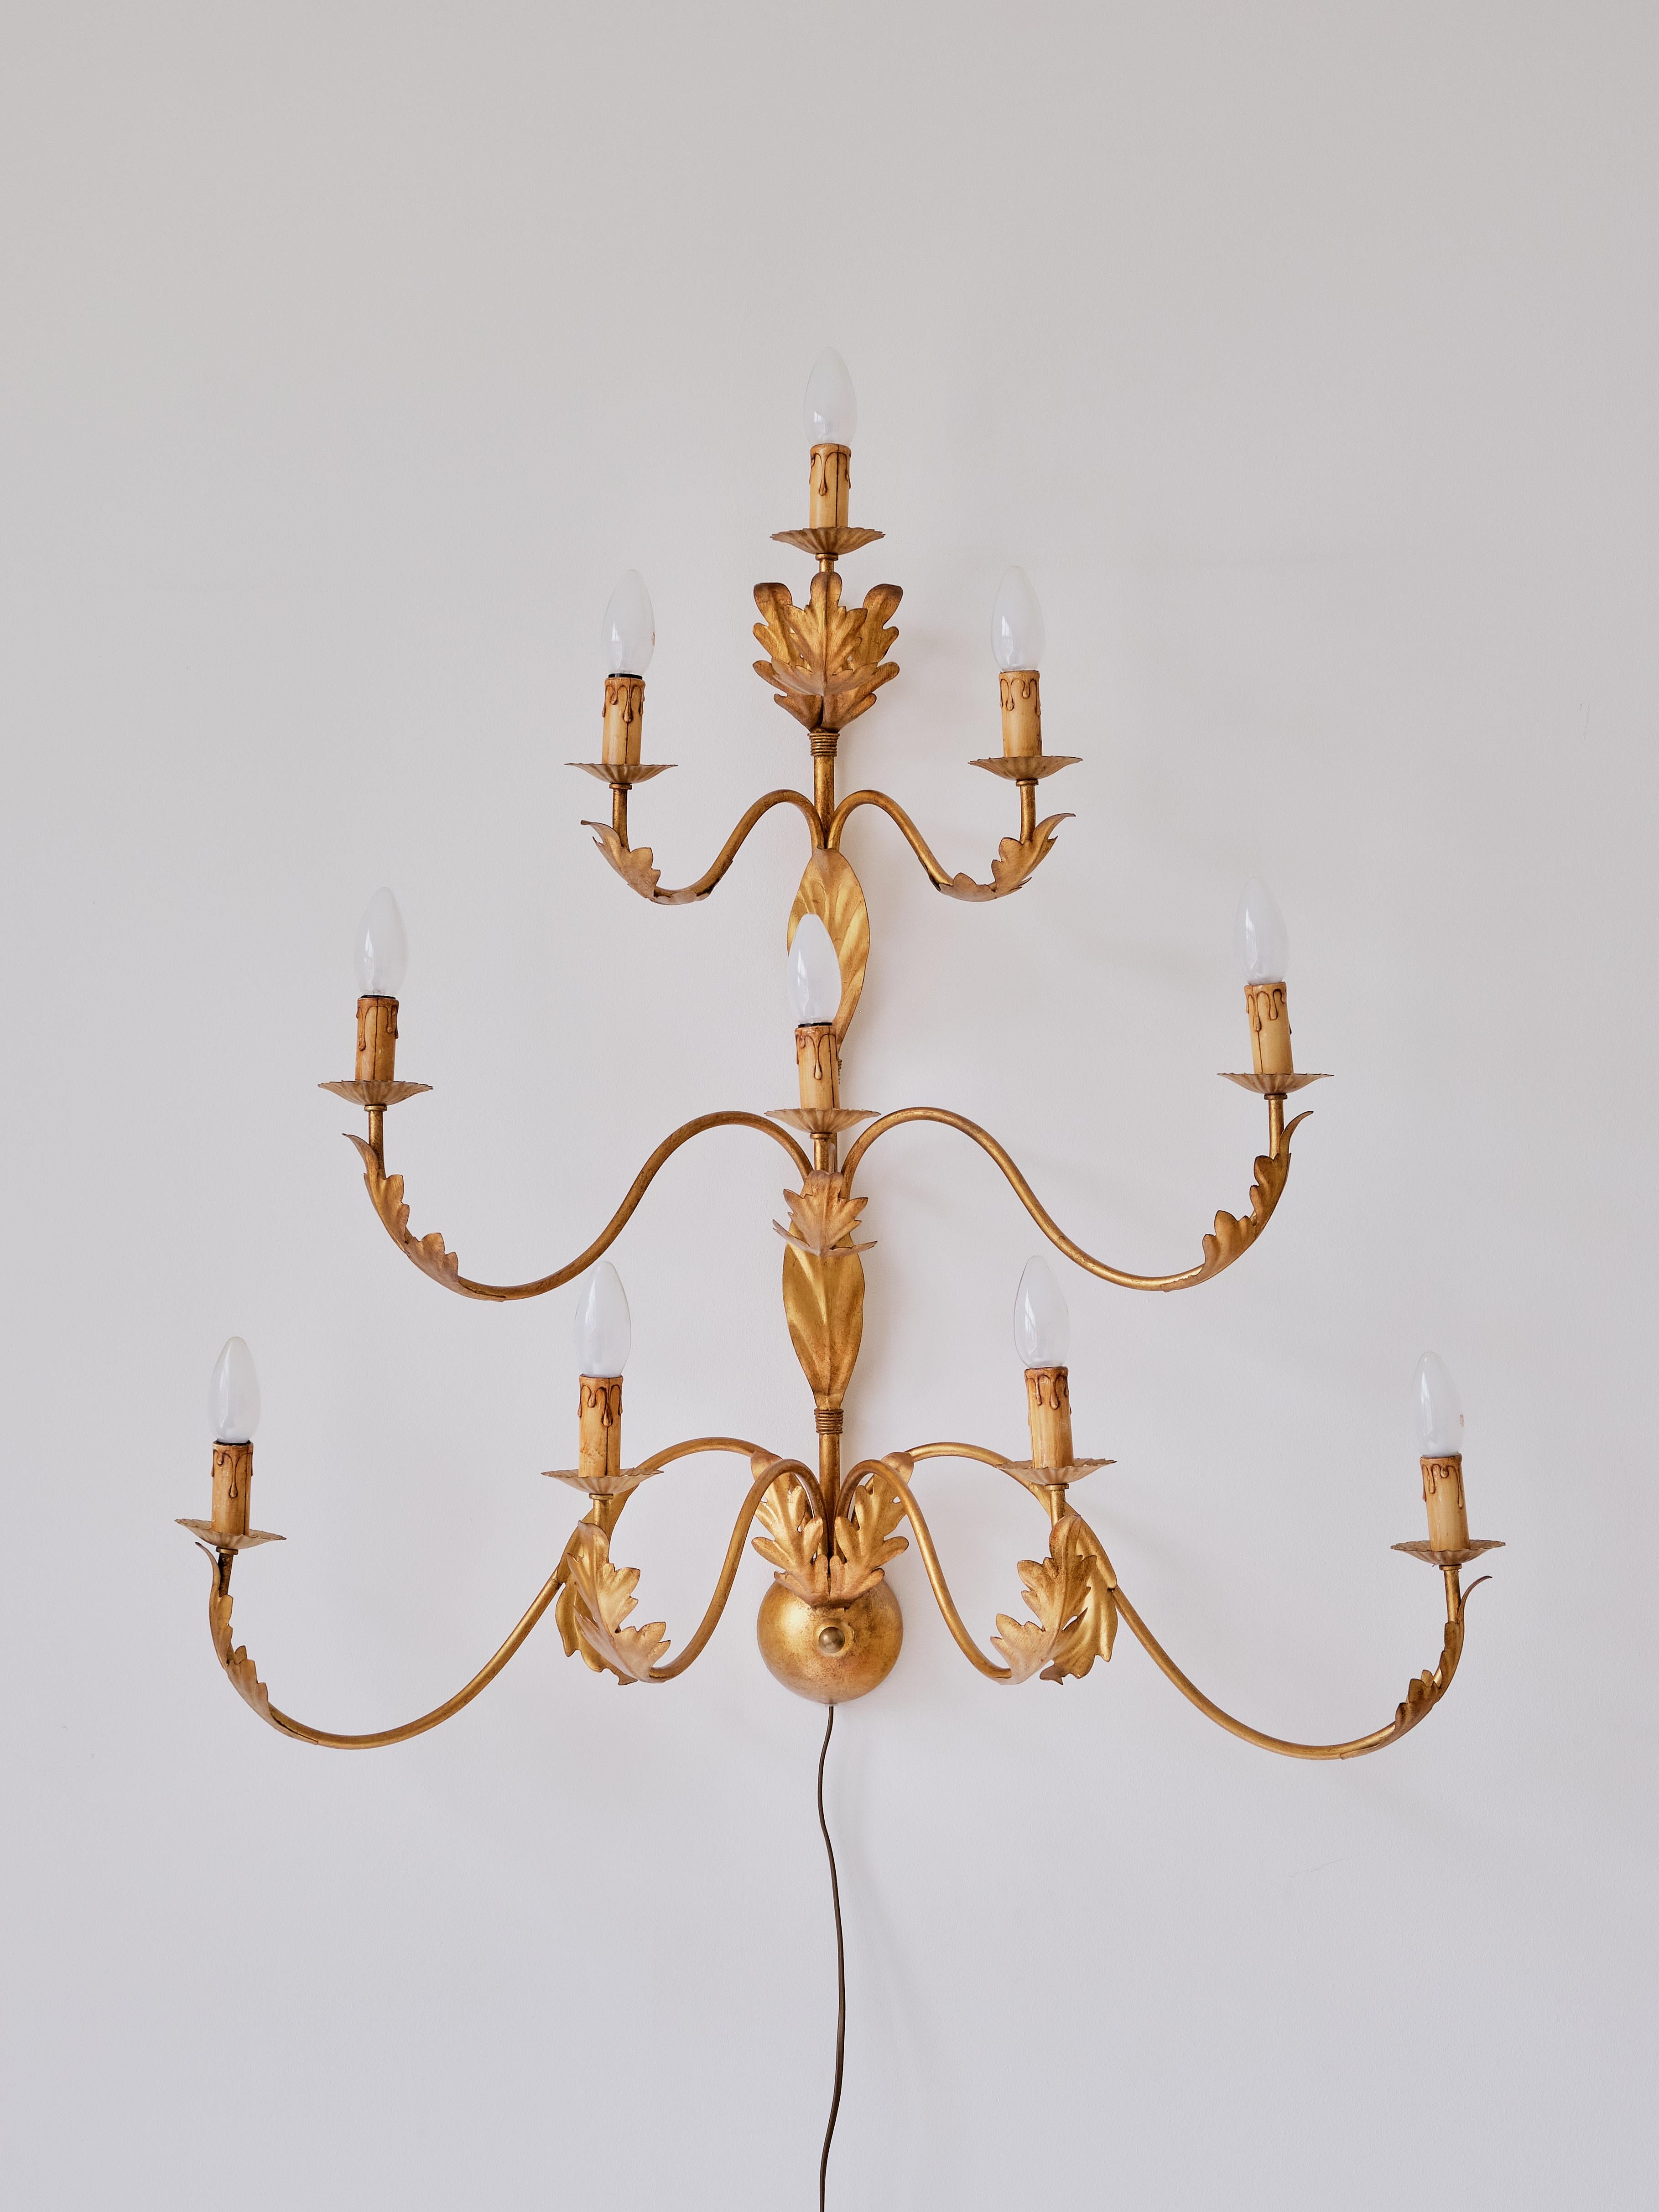 This sumptuous, large wall light was produced by Banci Firenze in Italy in the 1960s. The impressive design is marked by the 10 arms tiered from top to bottom, the width increasing to finally created an overall soft triangular shape. Each arm with